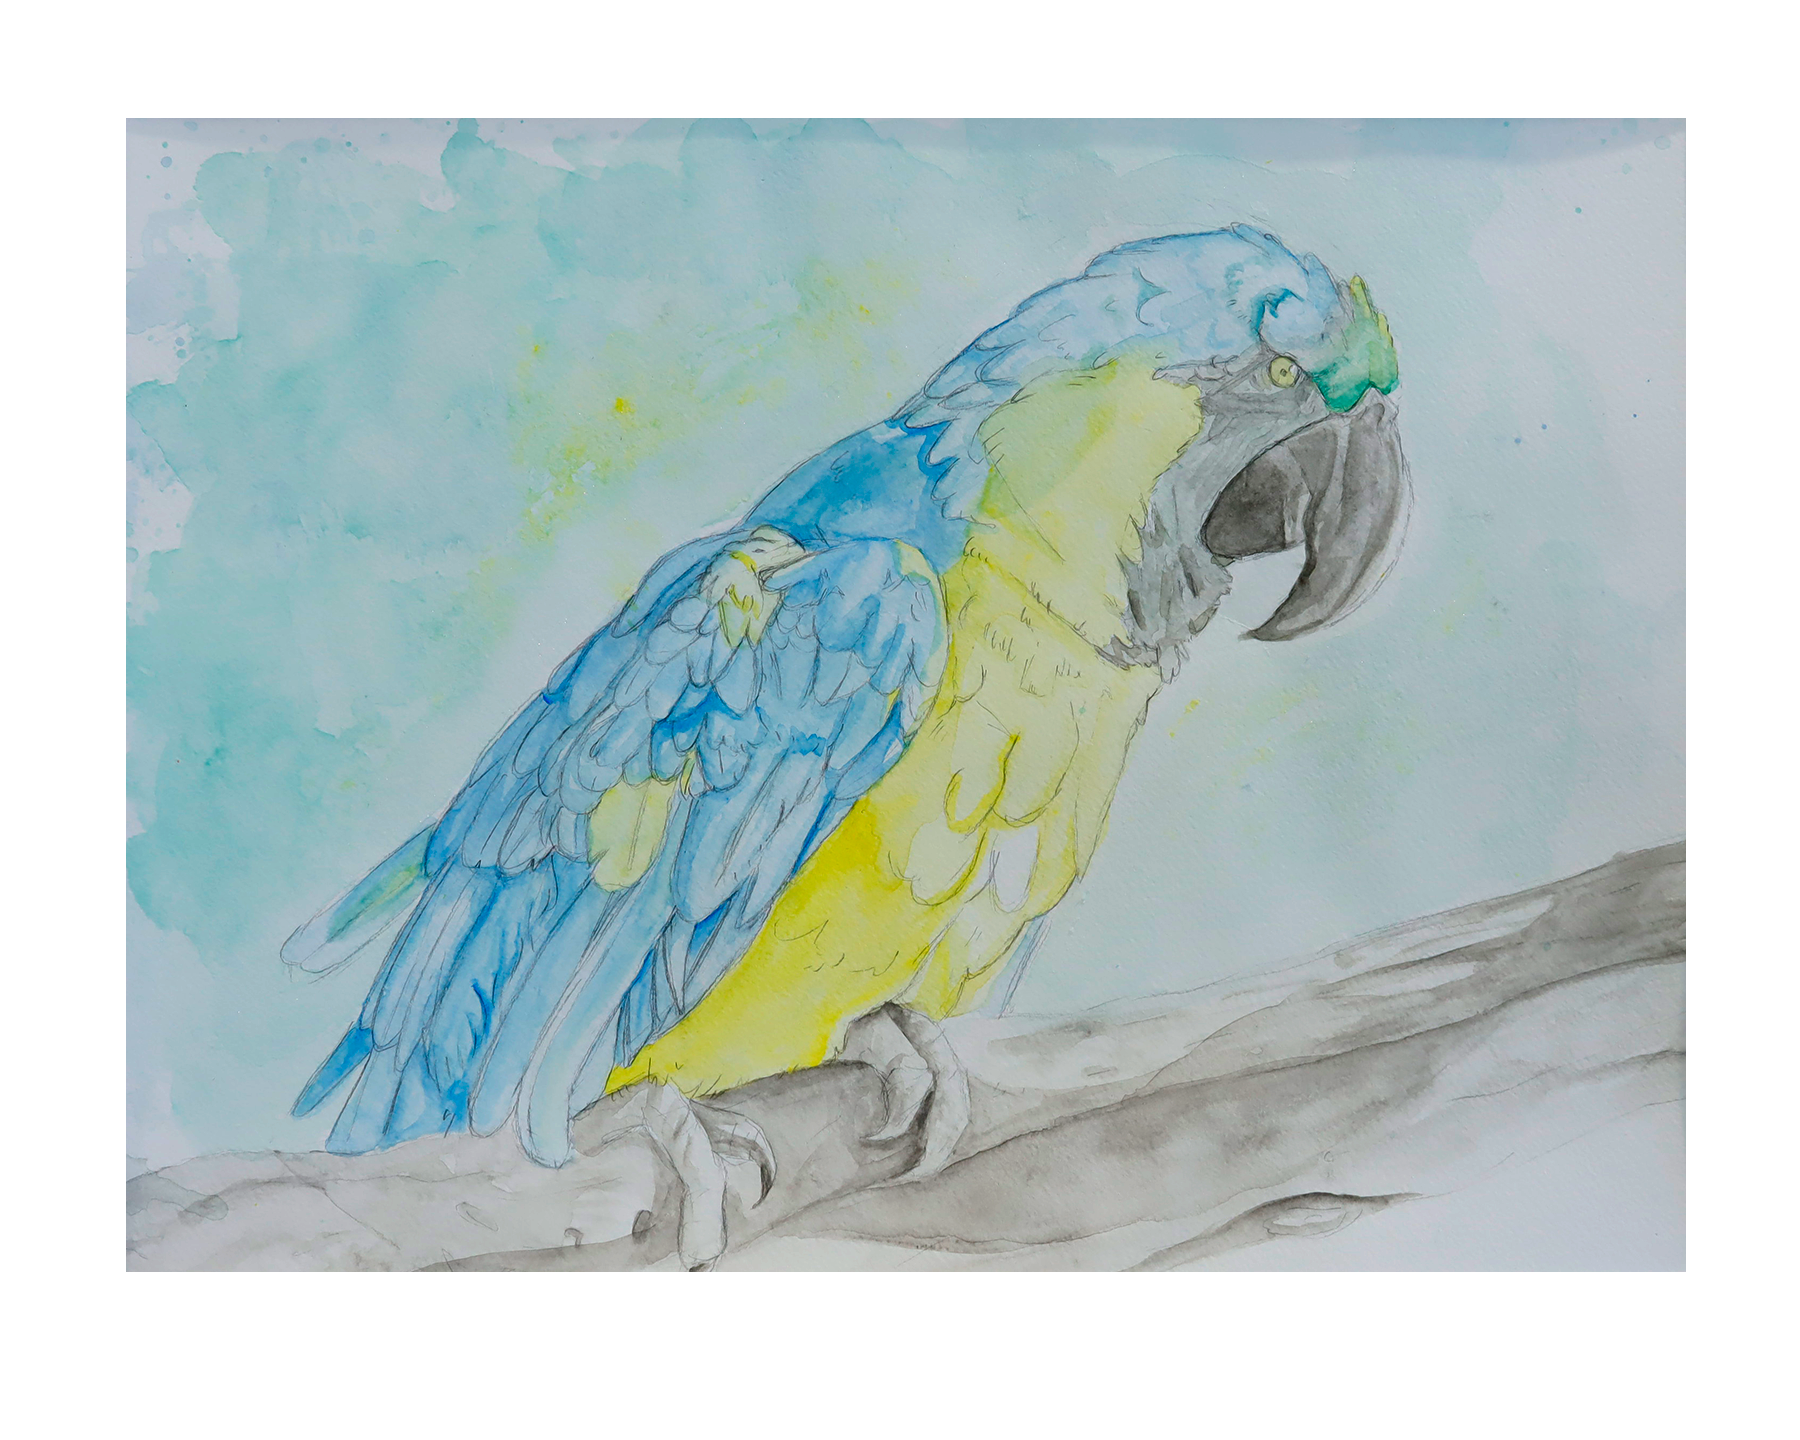 MSHSL-Watercolor-painting-of-Parrot.png